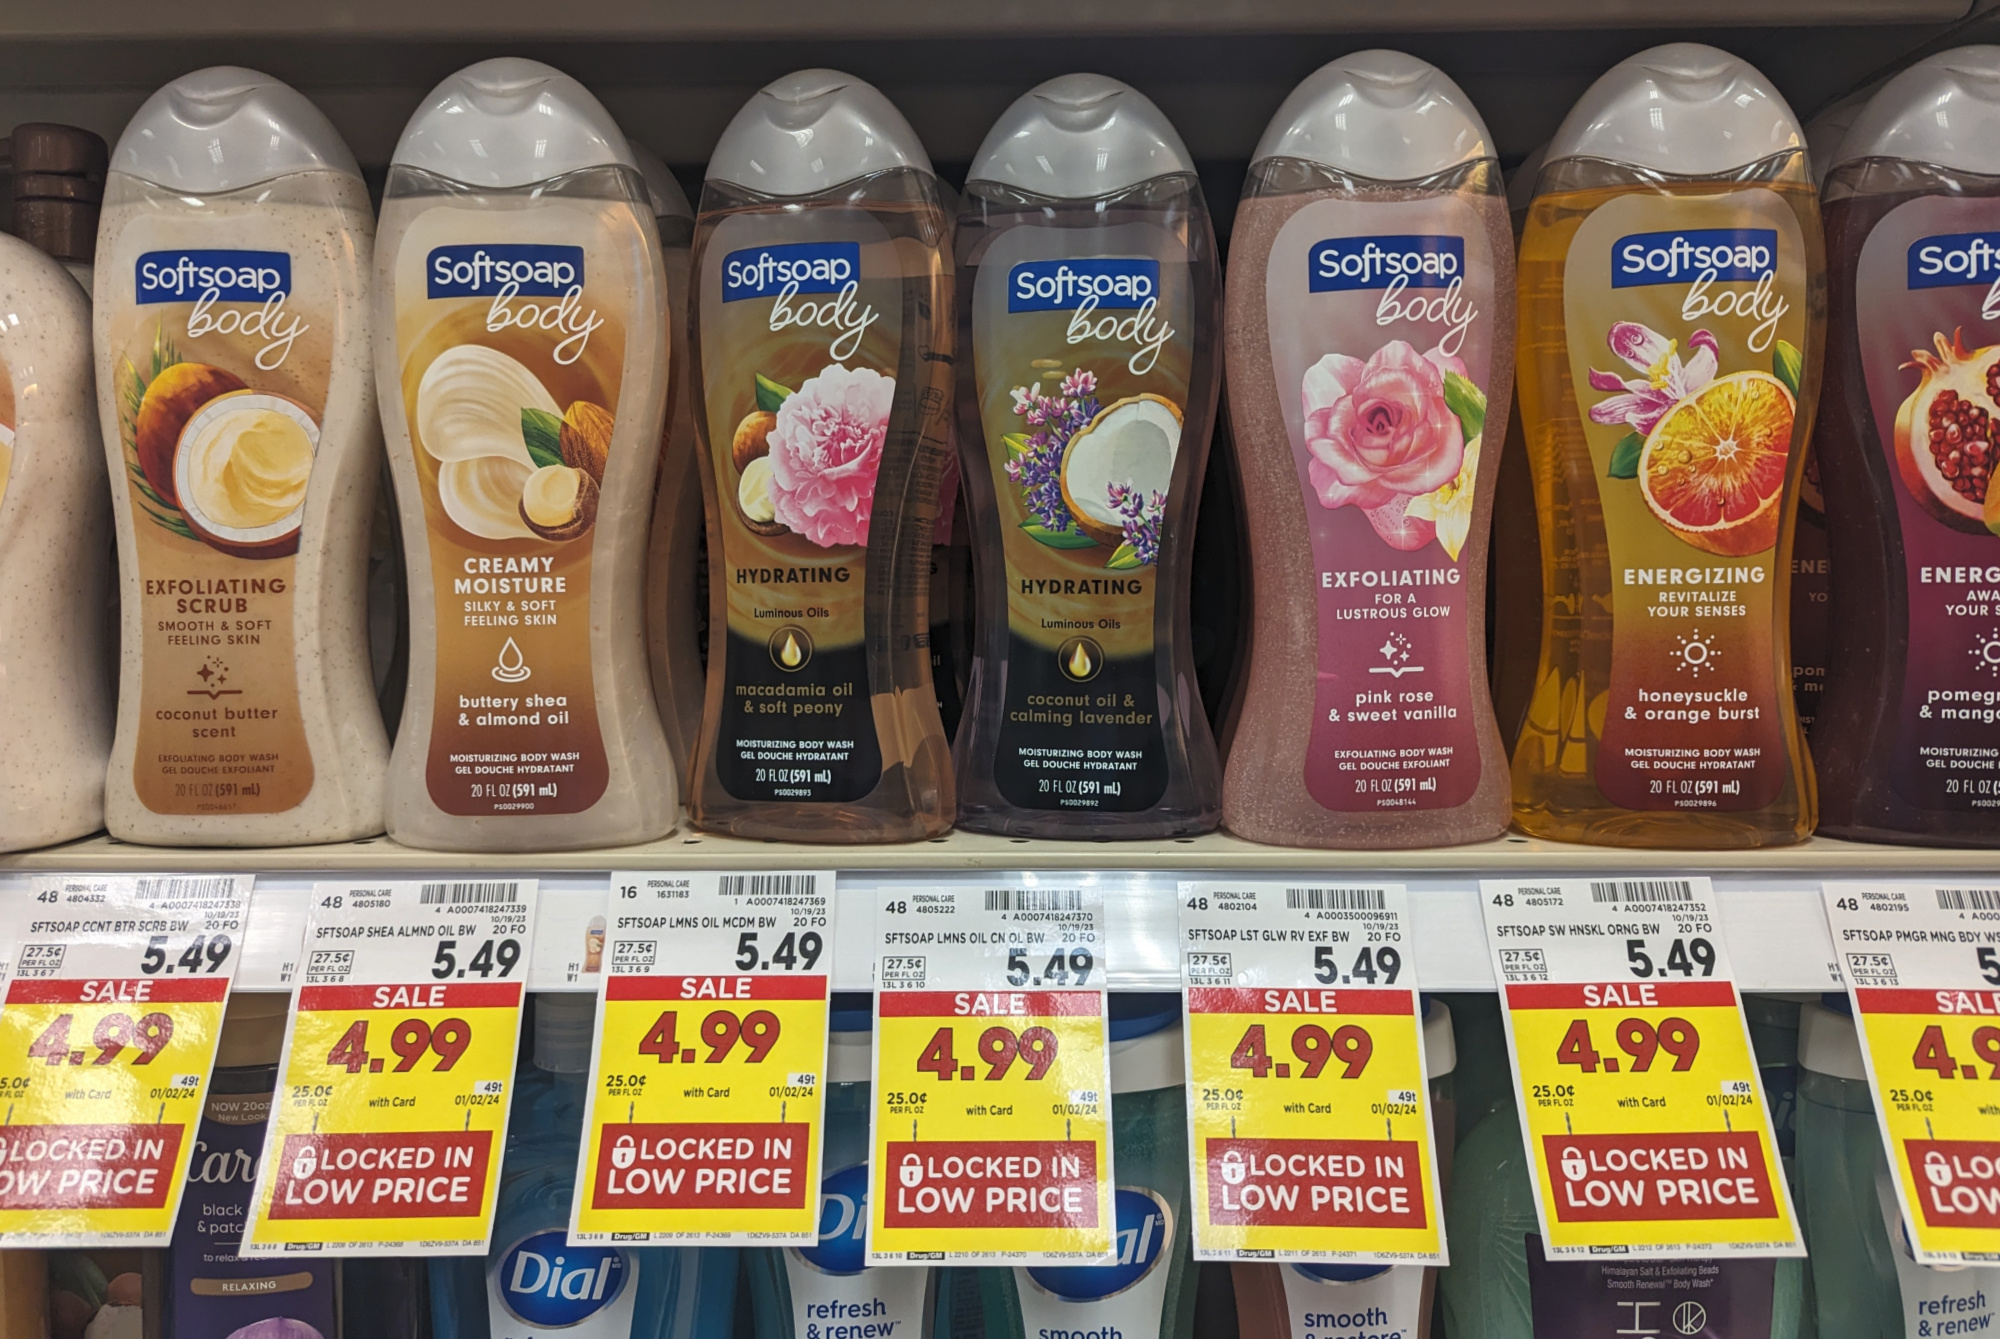 Softsoap Body Wash As Low As $3.99 At Kroger